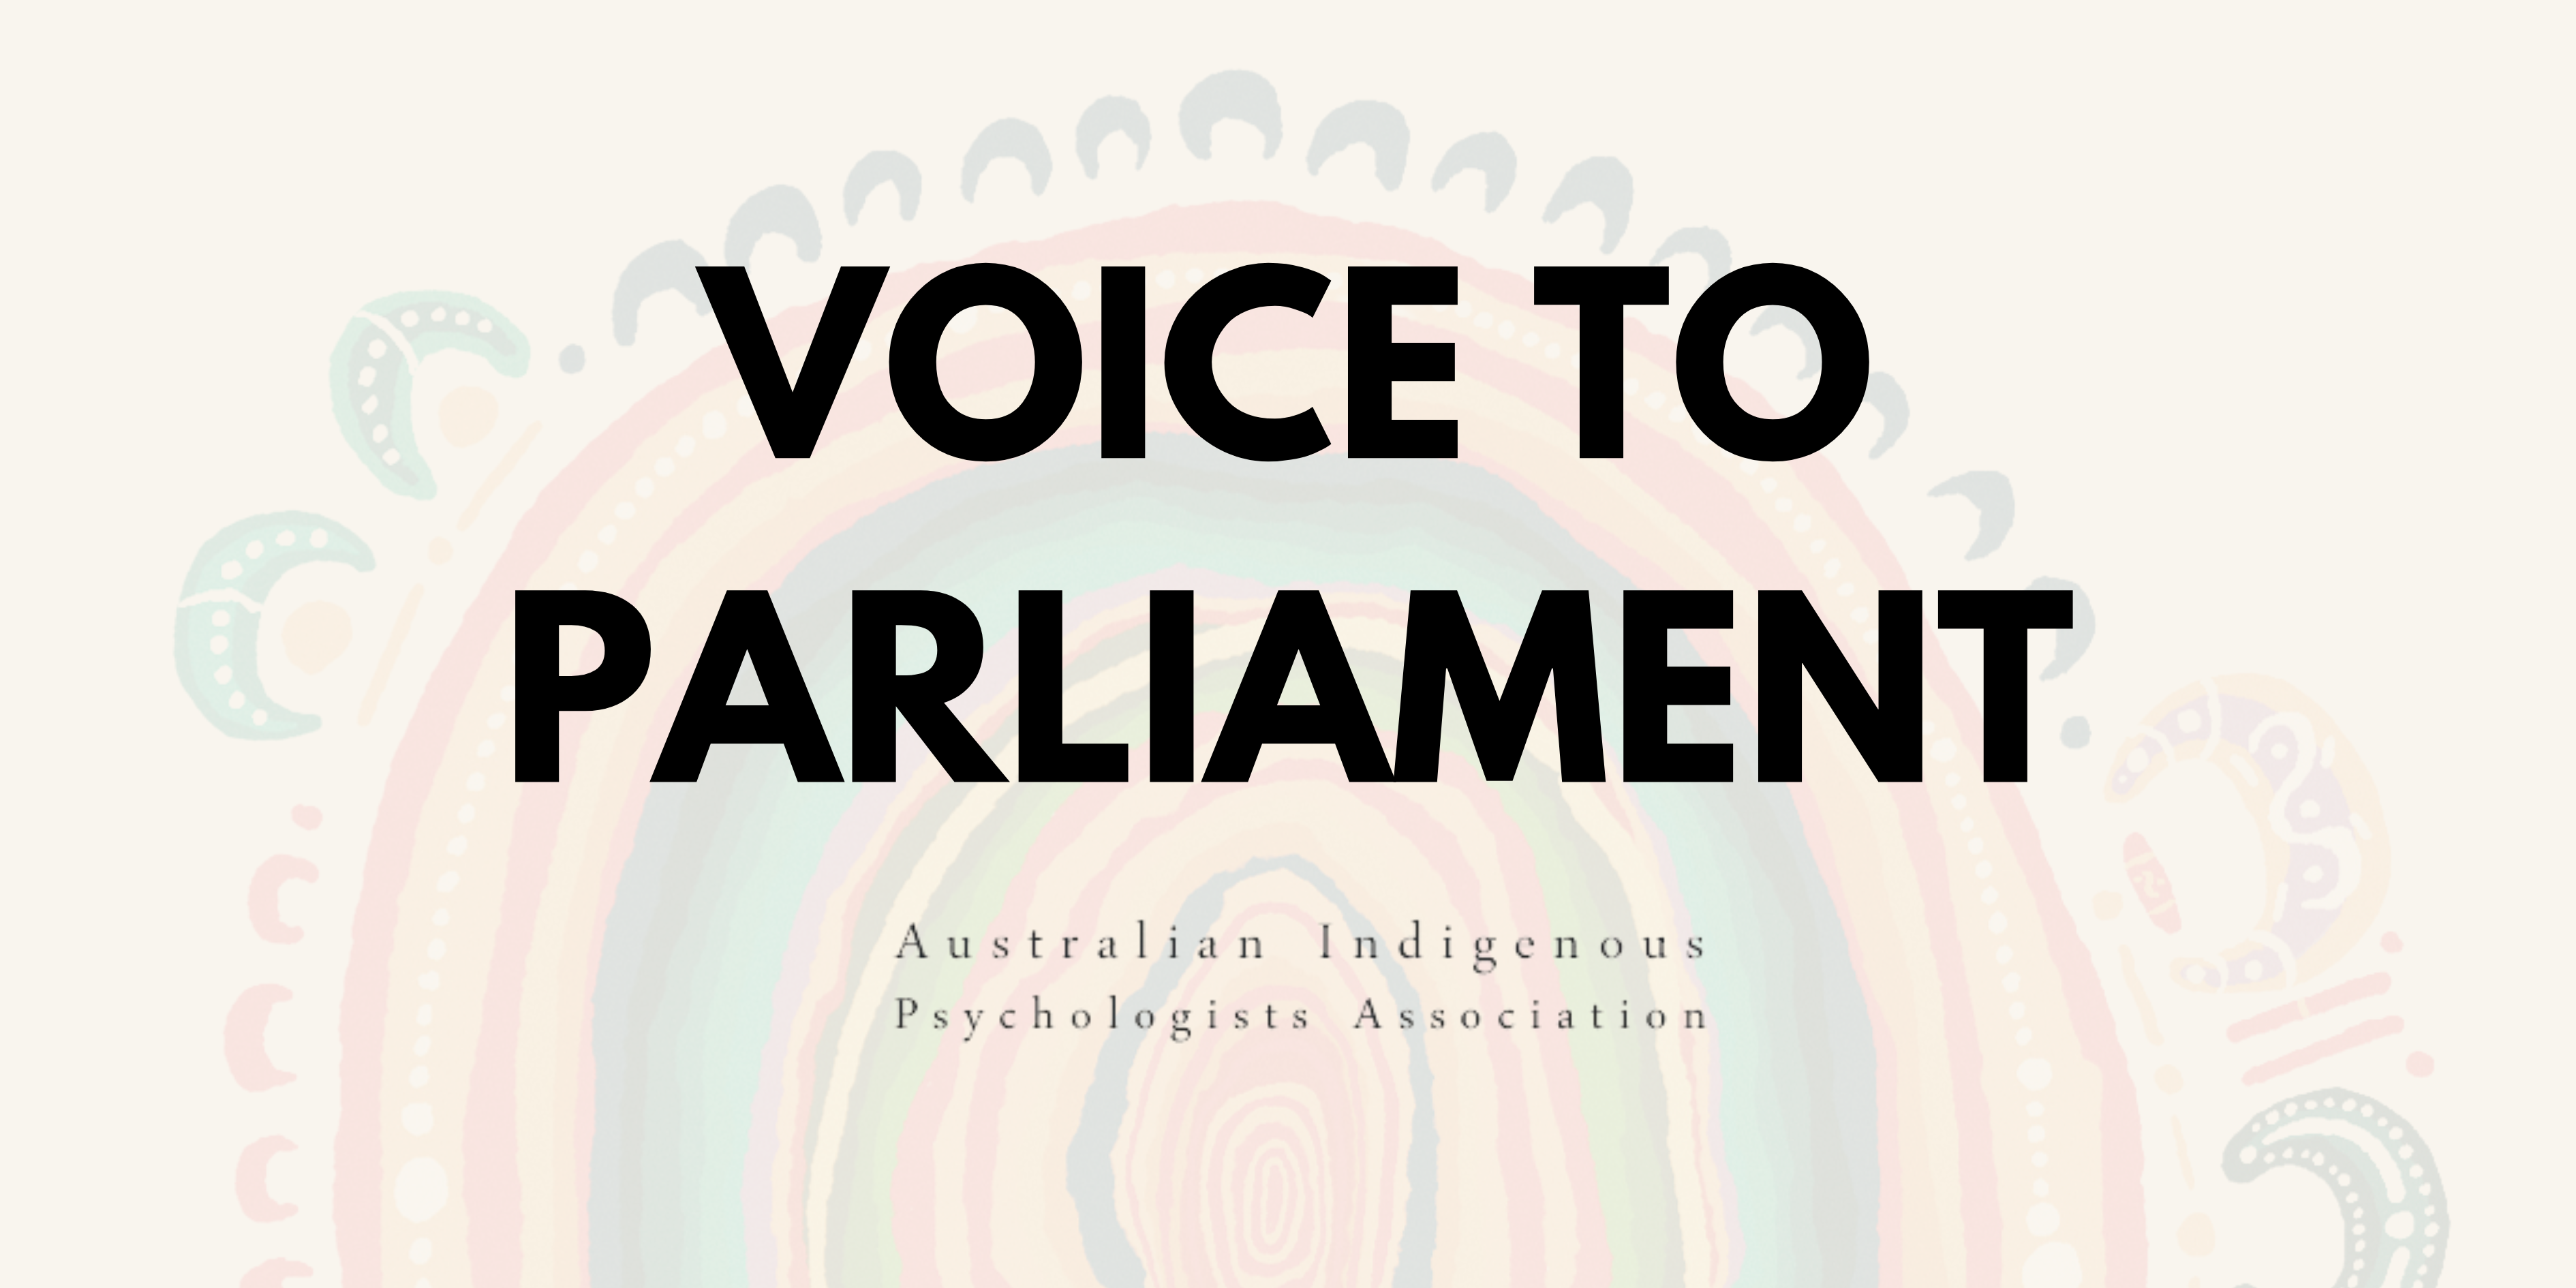 Featured image for “AIPA’s Statement on the Voice to Parliament”